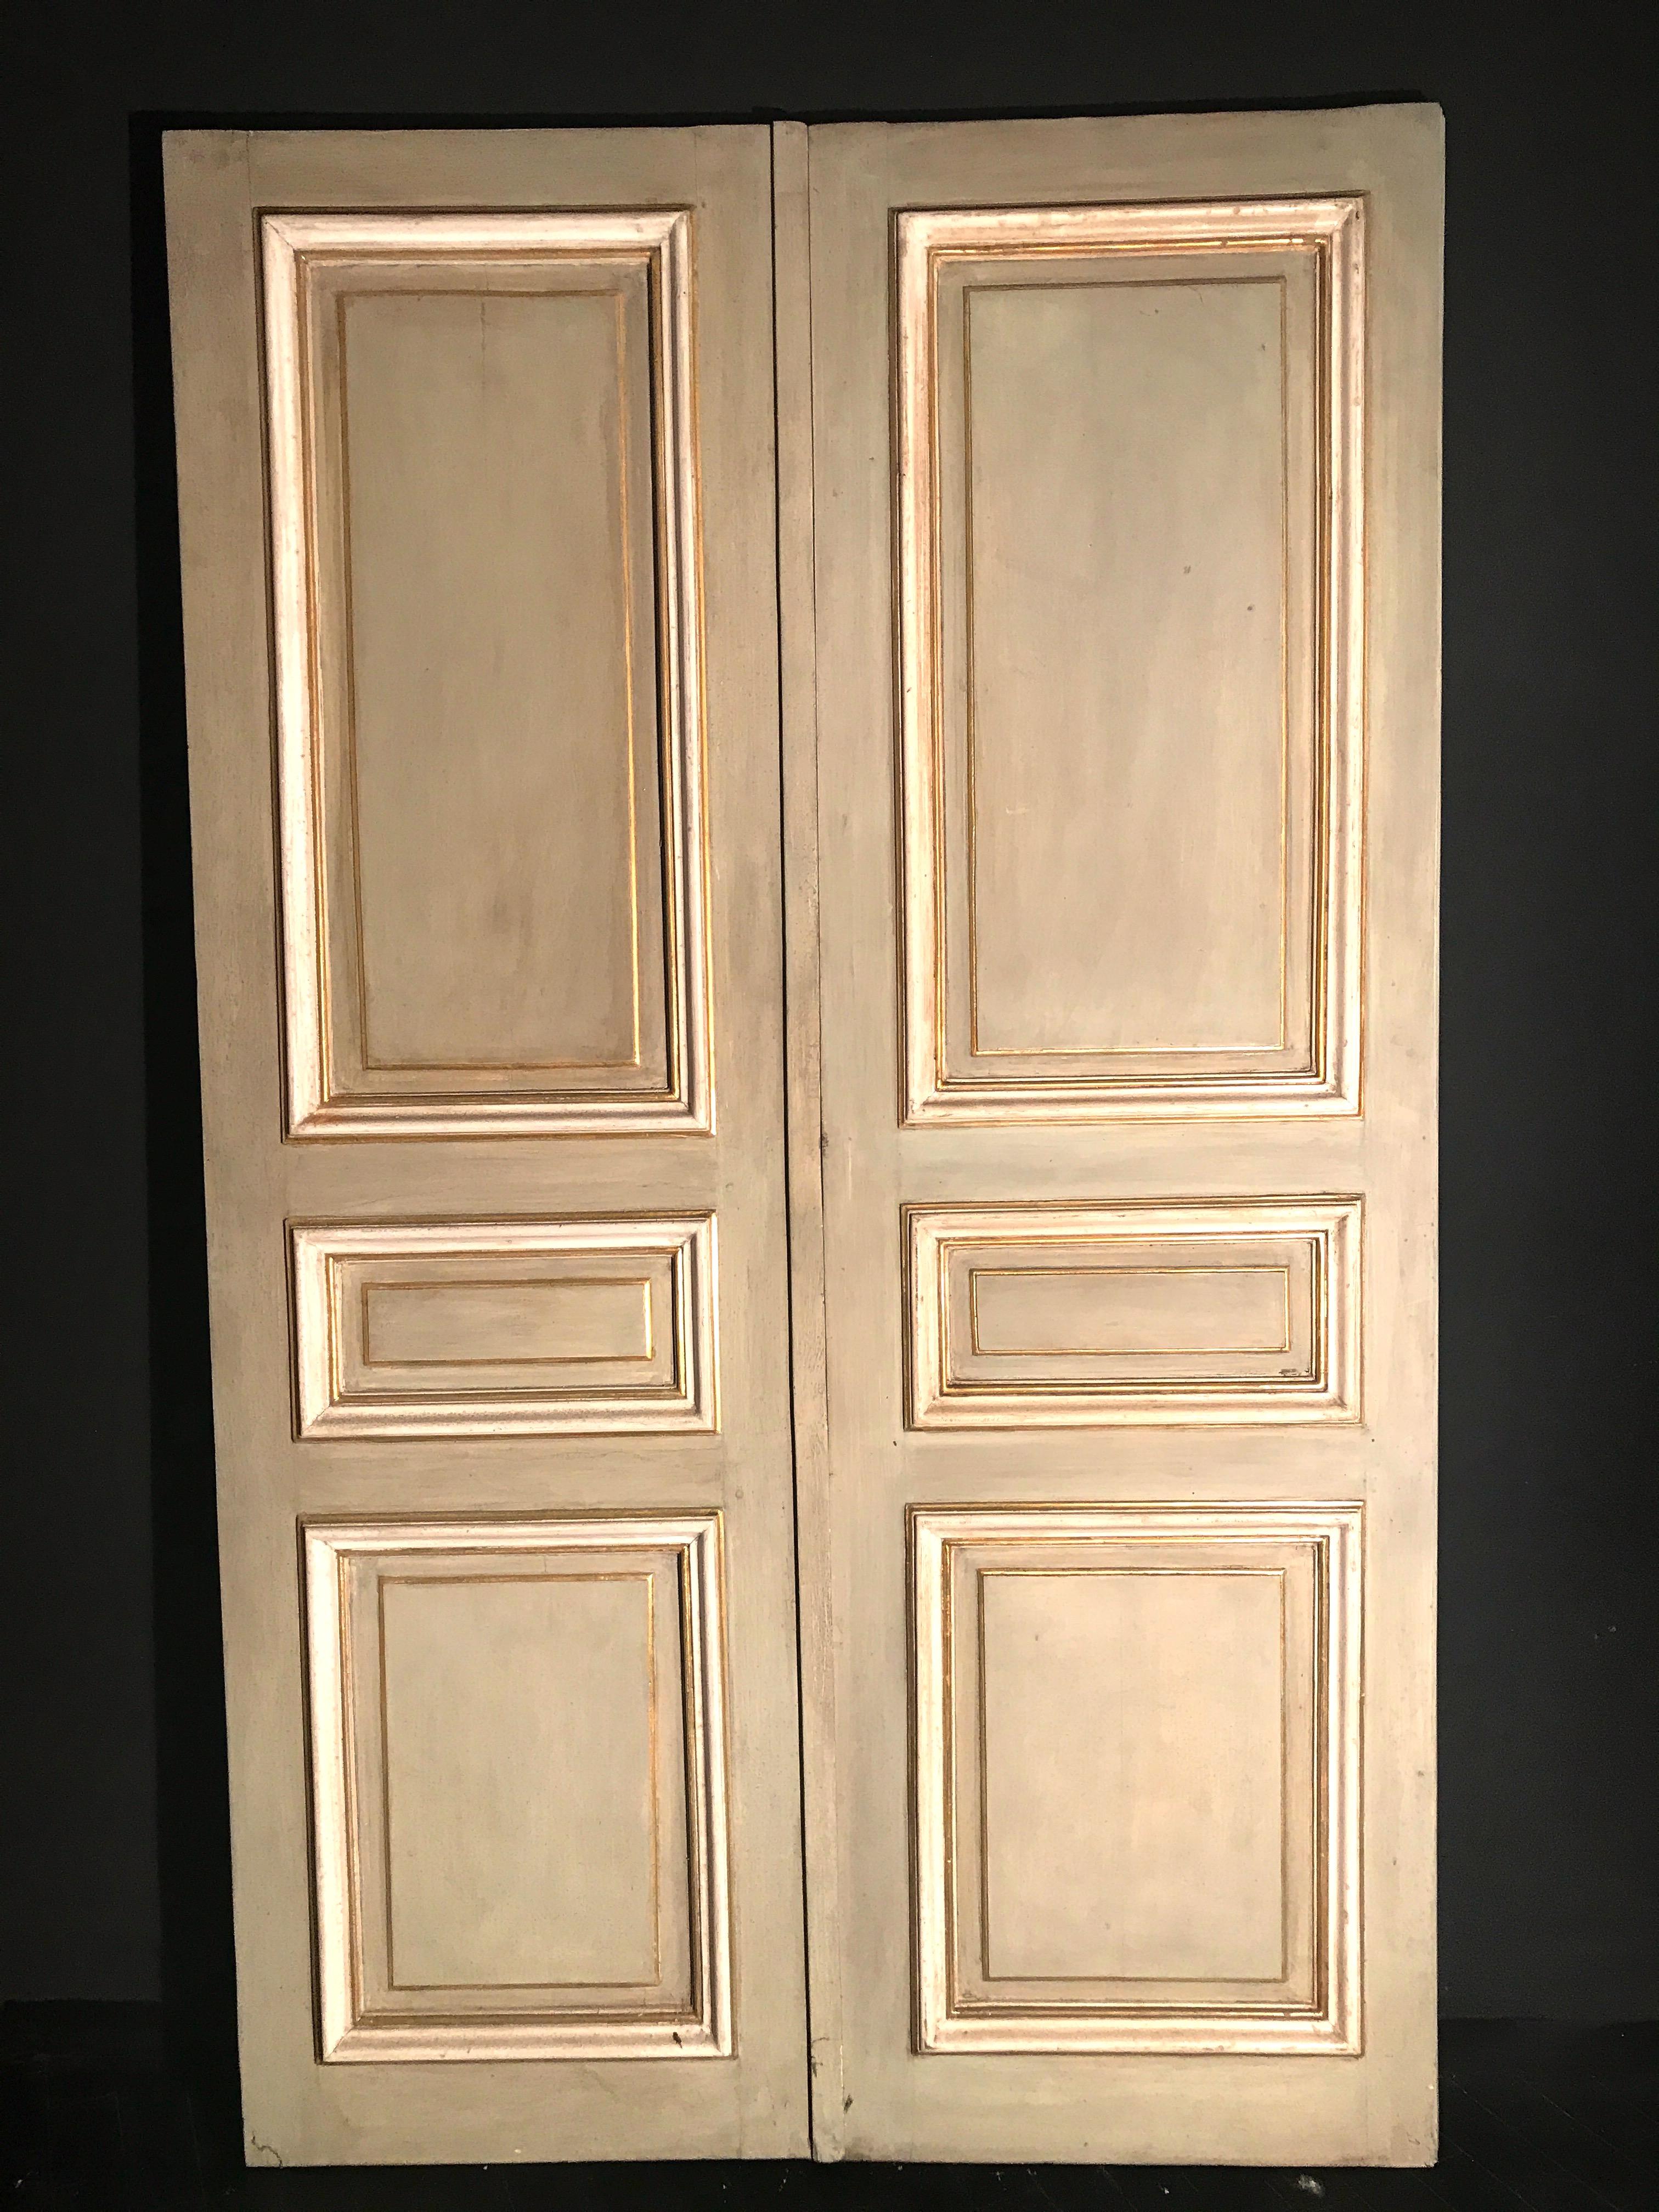 Magnificent 19th Century Italian Painted Doors or Panelling 7